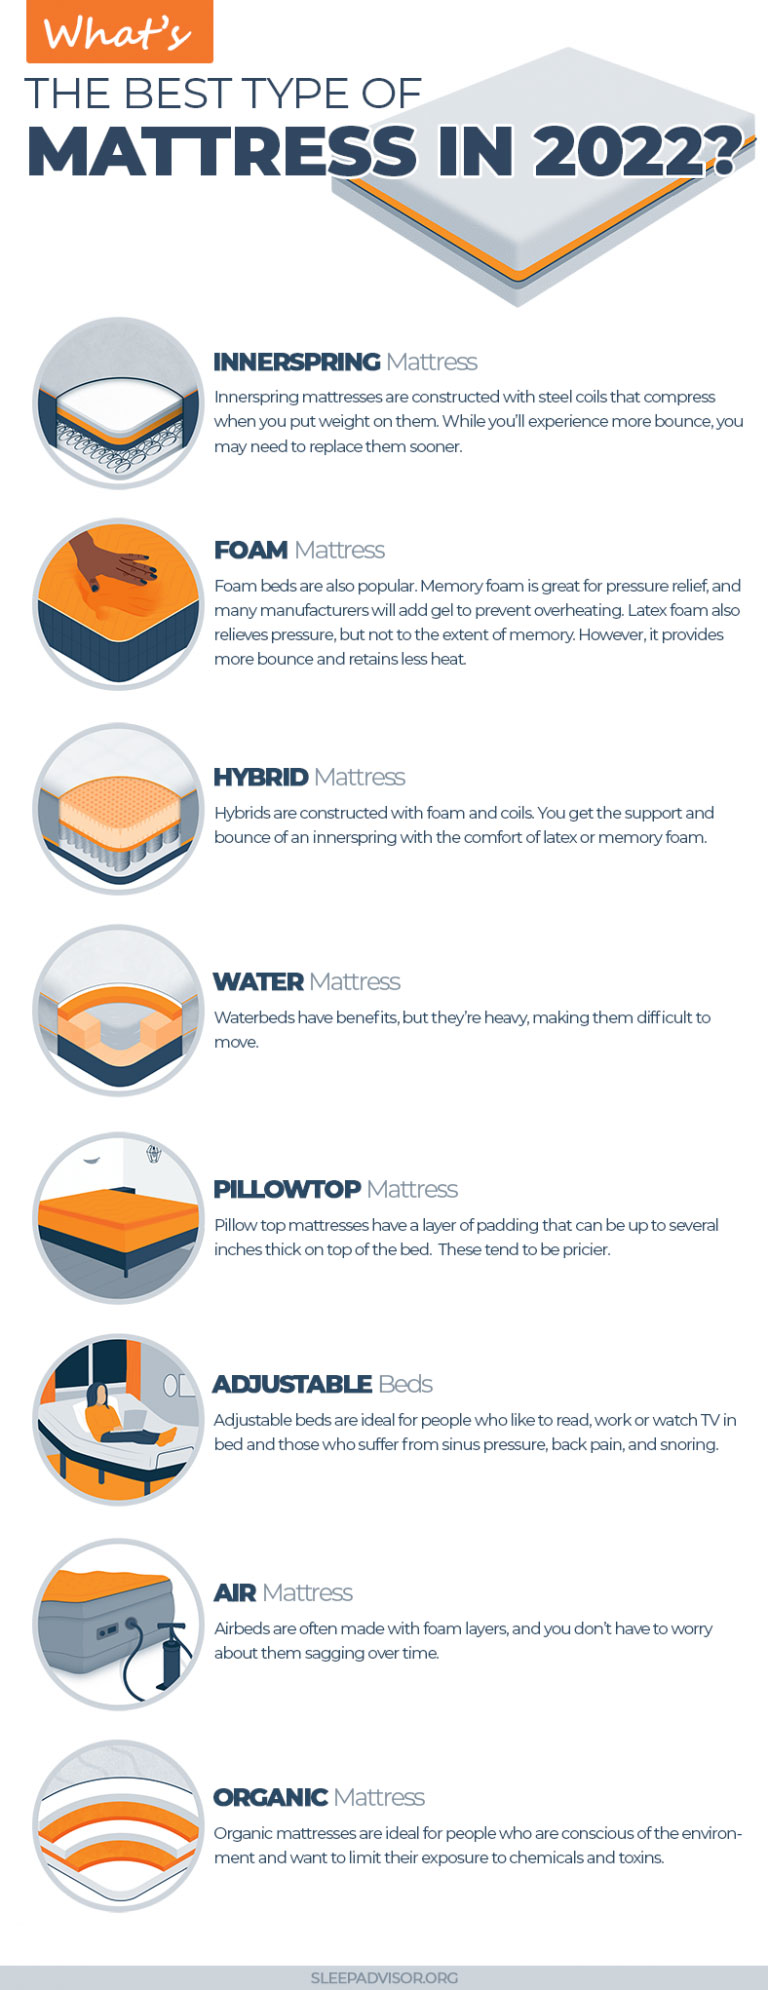 Infographic Whats The Best Type of Mattress in 2022